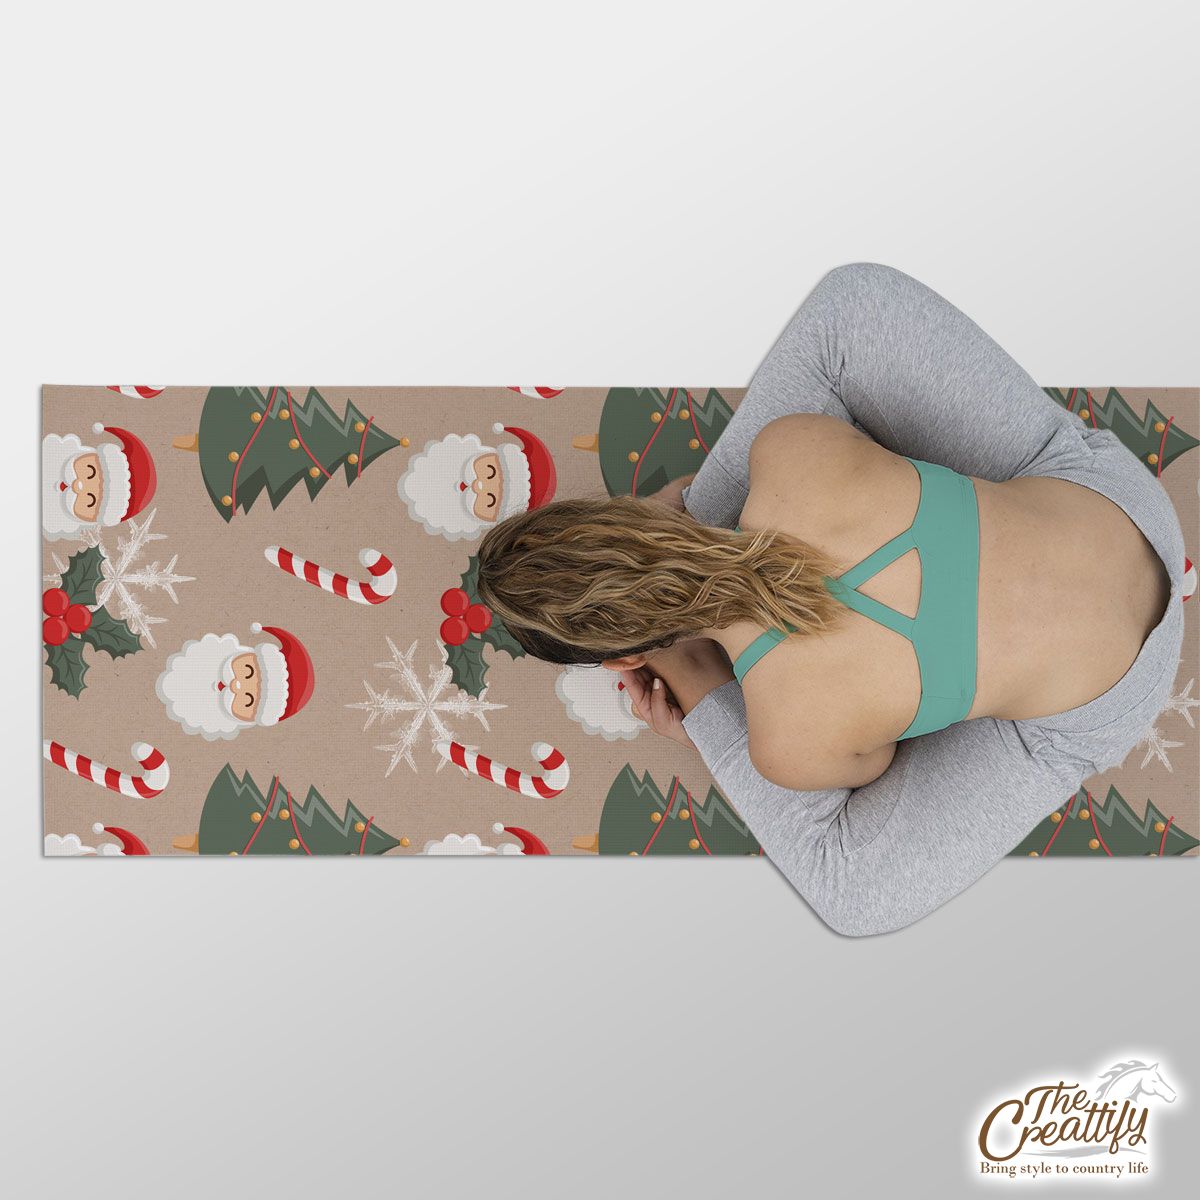 Santa Clause, Christmas Tree, Candy Cane, Holly Leaf On Snowflake Background Yoga Mat